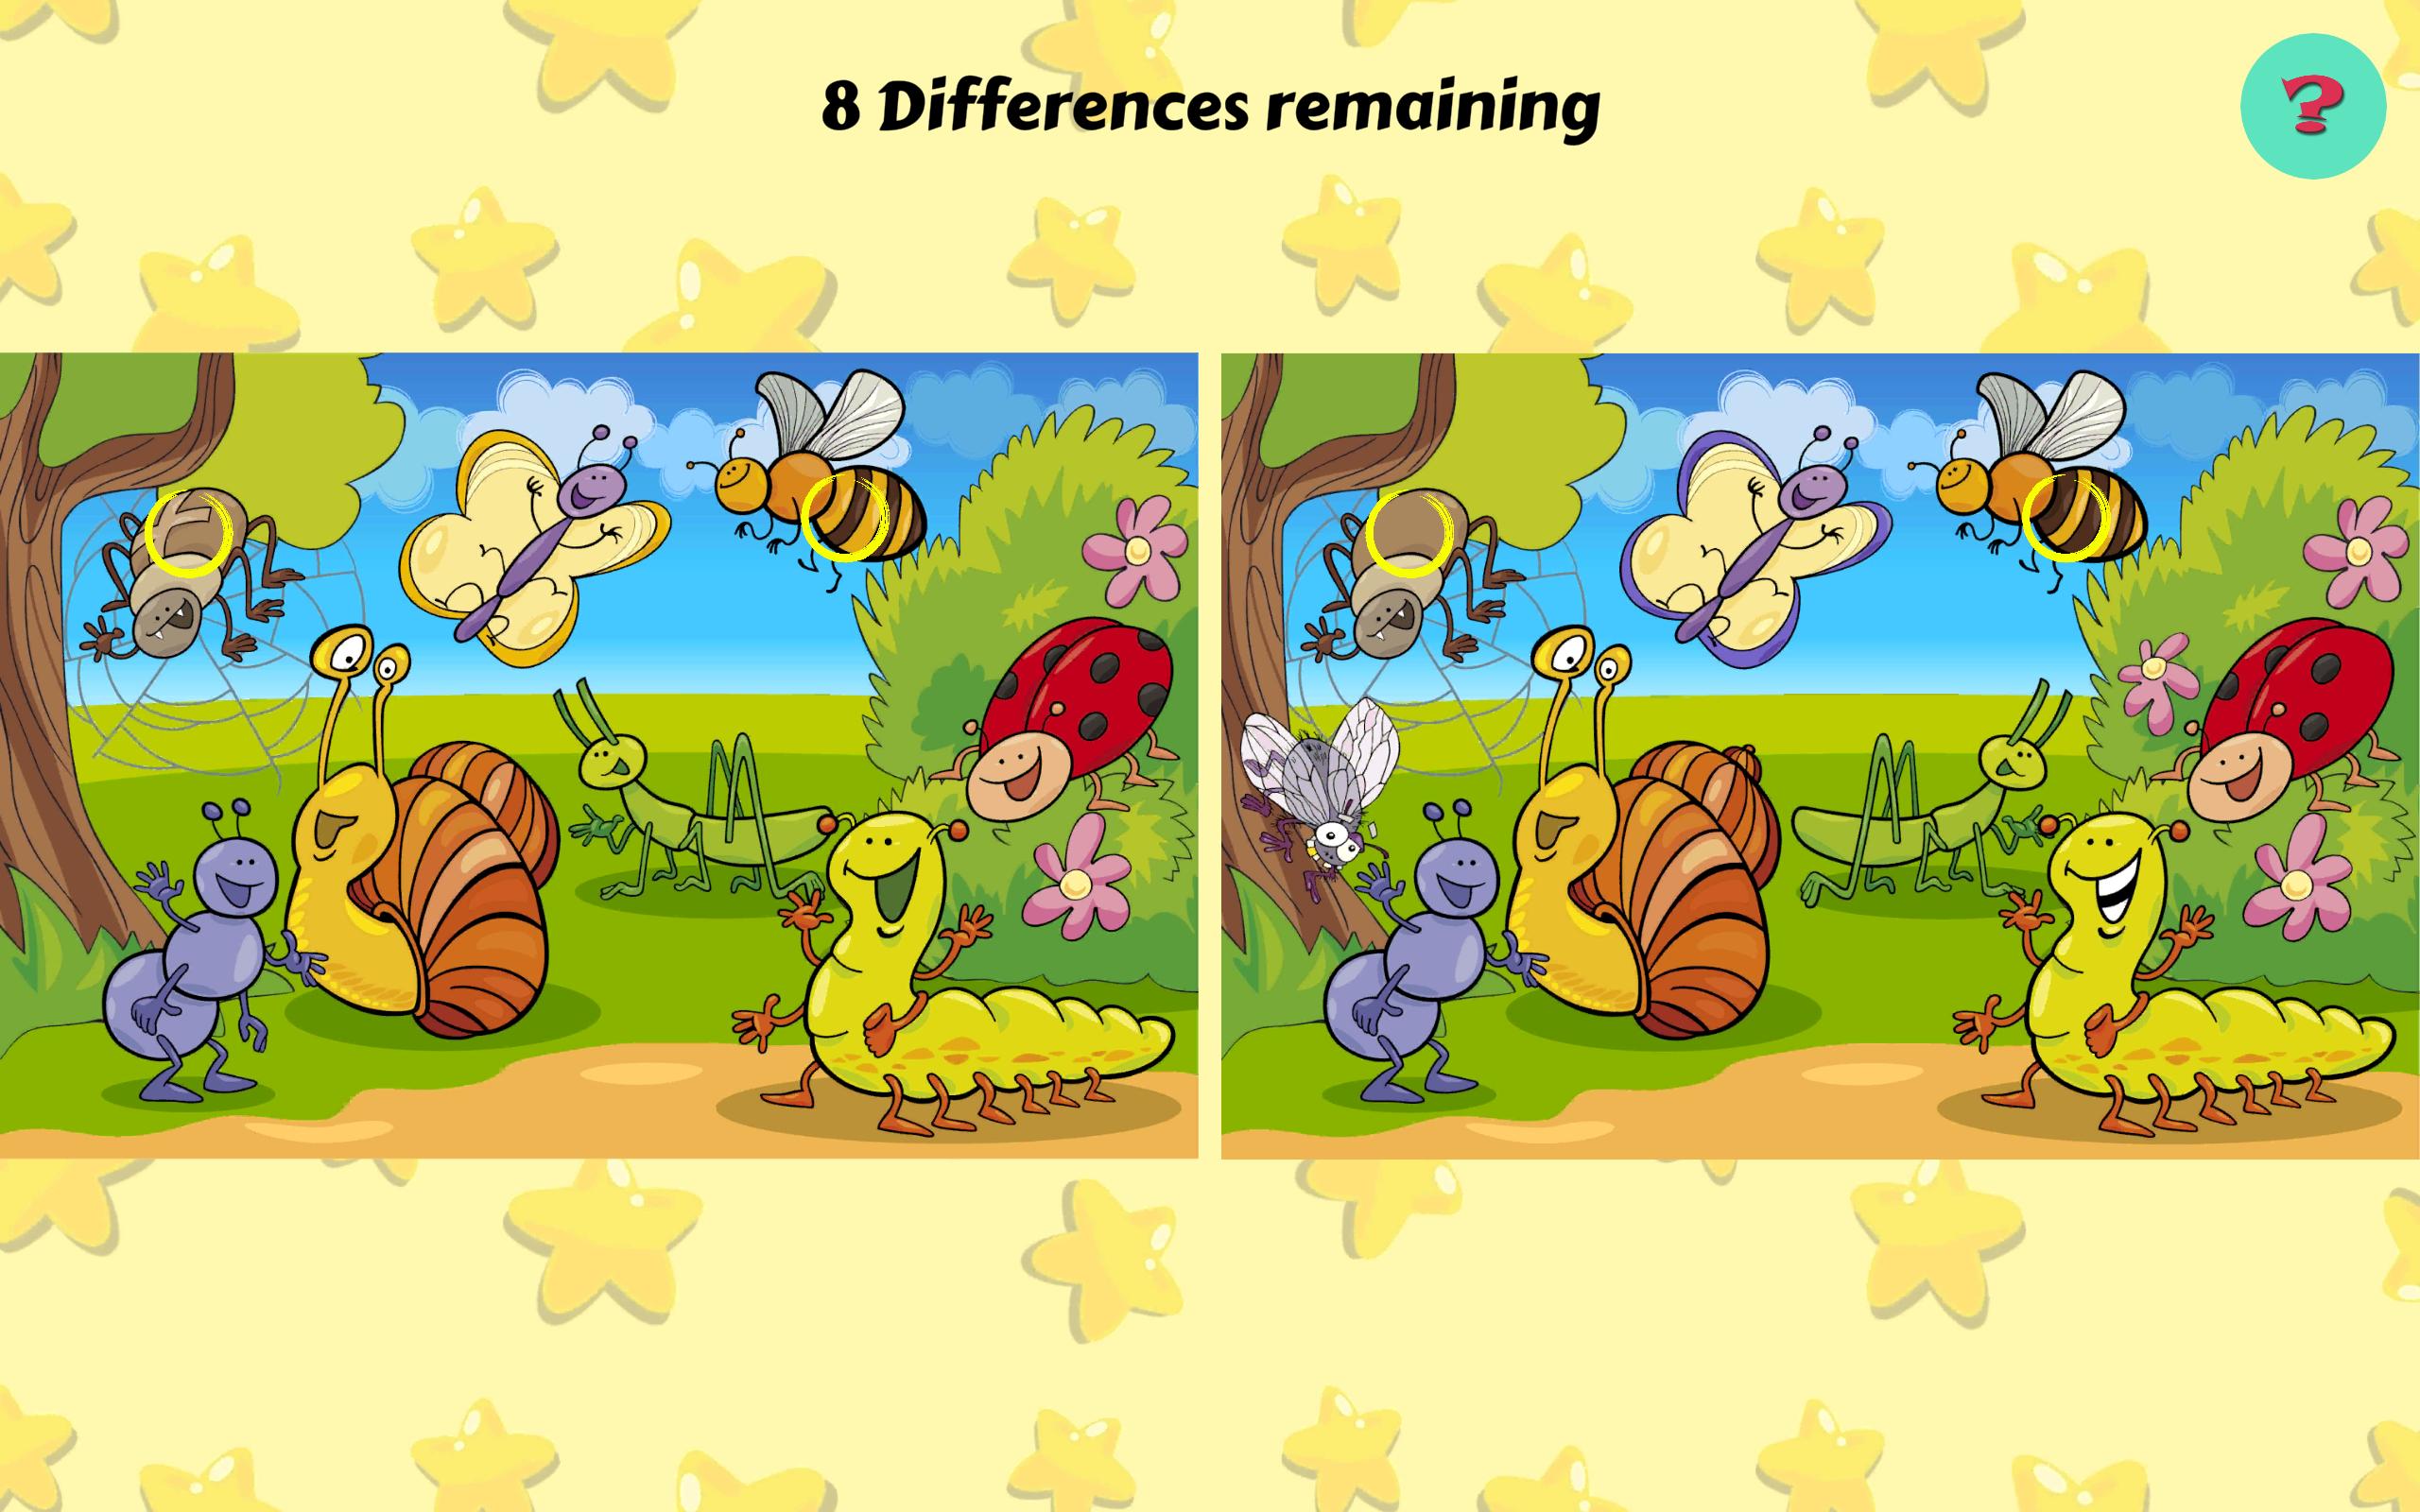 Игра на телефон найти отличия. Find differences pictures. Игры для детей 5 лет. Differences игра. Find the difference for Kids.